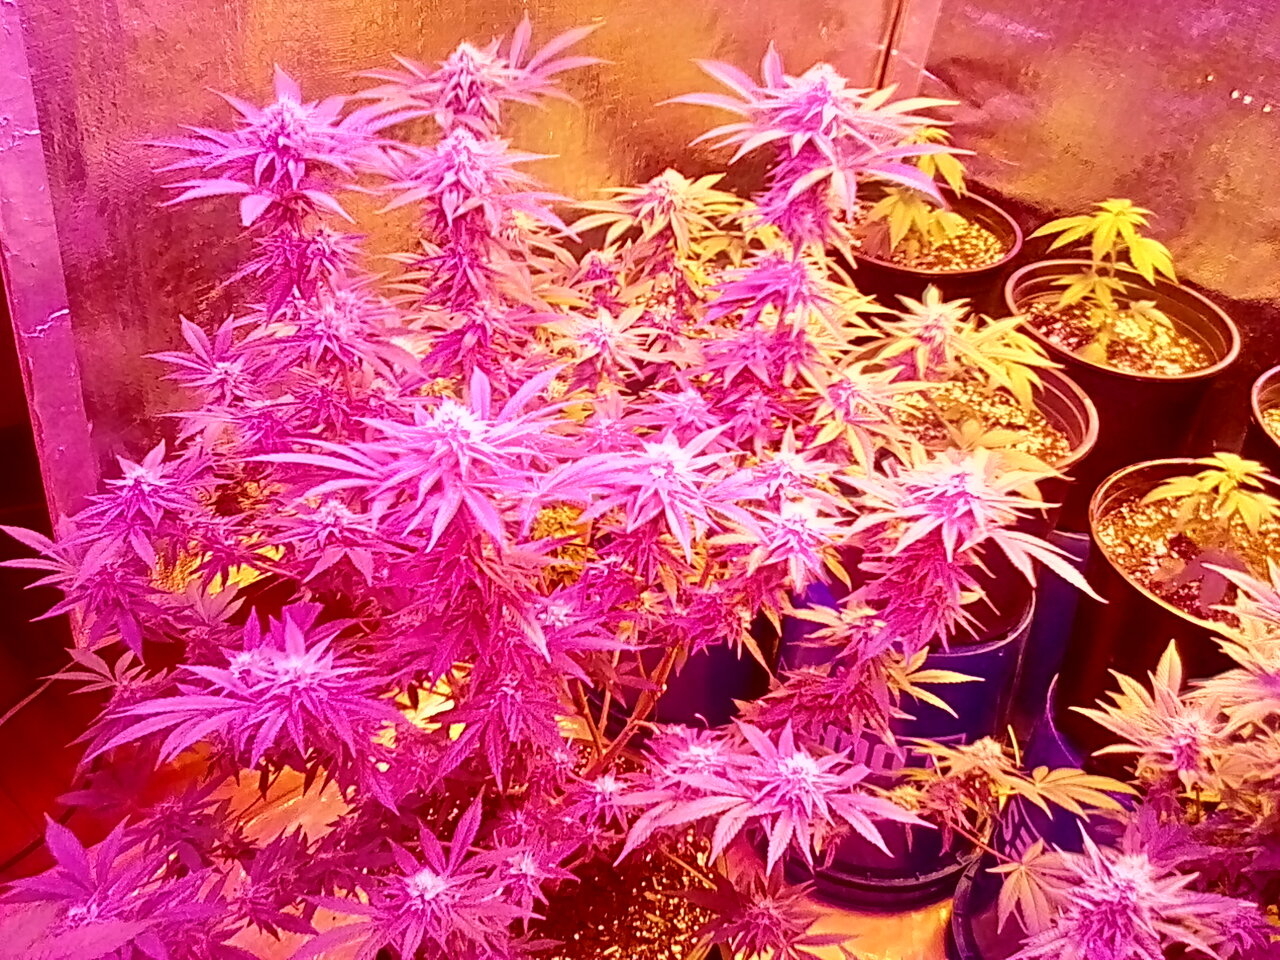 Mom at day 44 with her offspring Fruity pebbles